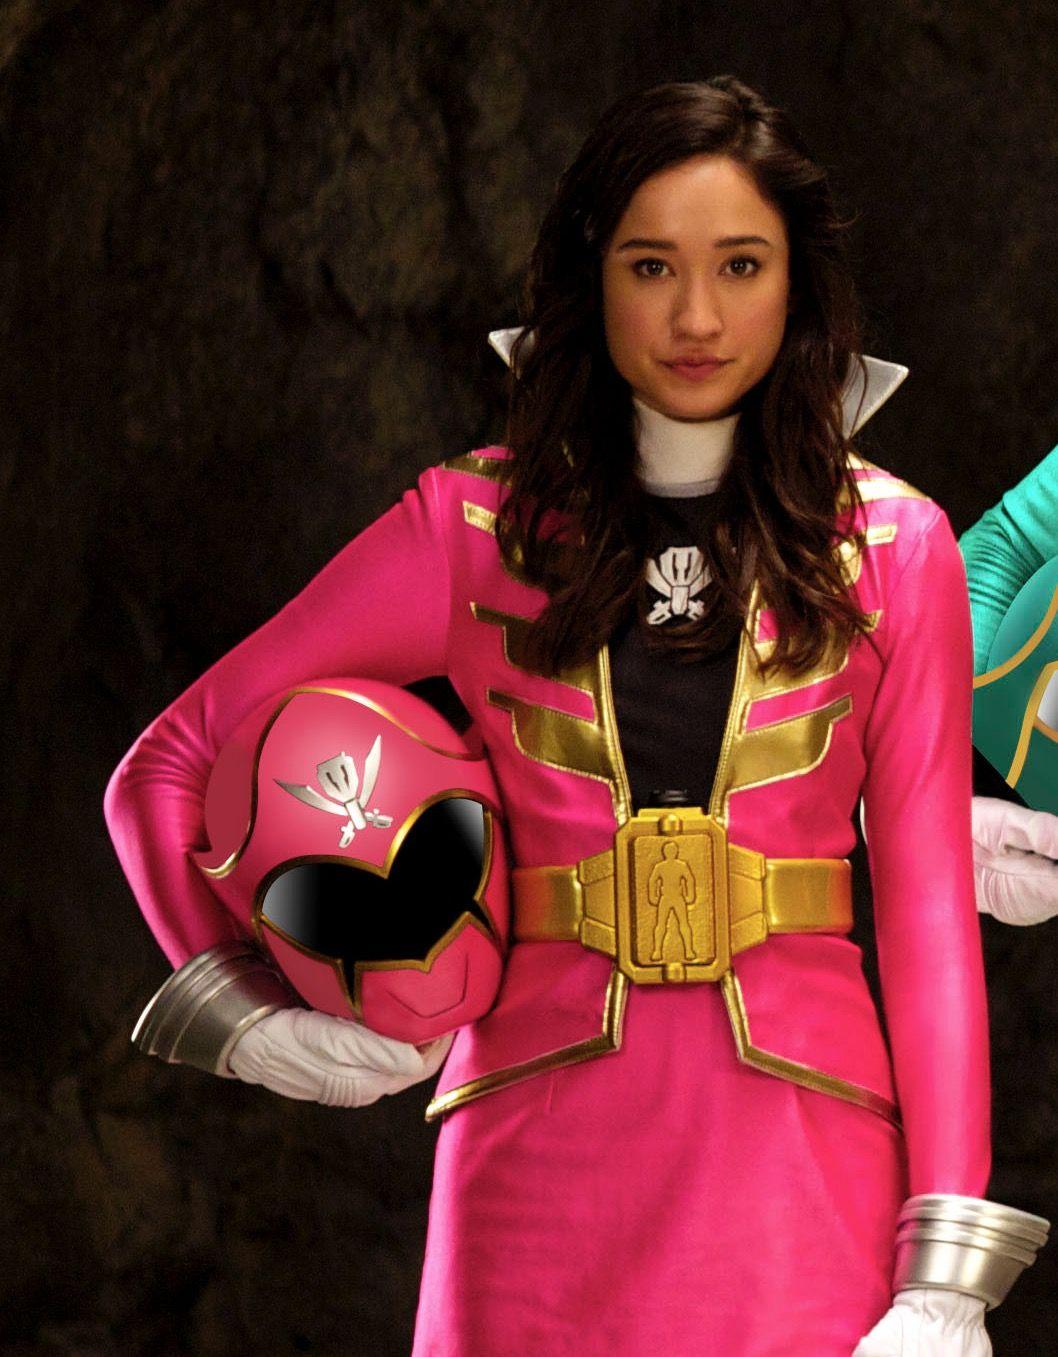 55+ Hot Pictures Of Christina Masterson – Pink Ranger In Power Rangers Megaforce | Best Of Comic Books